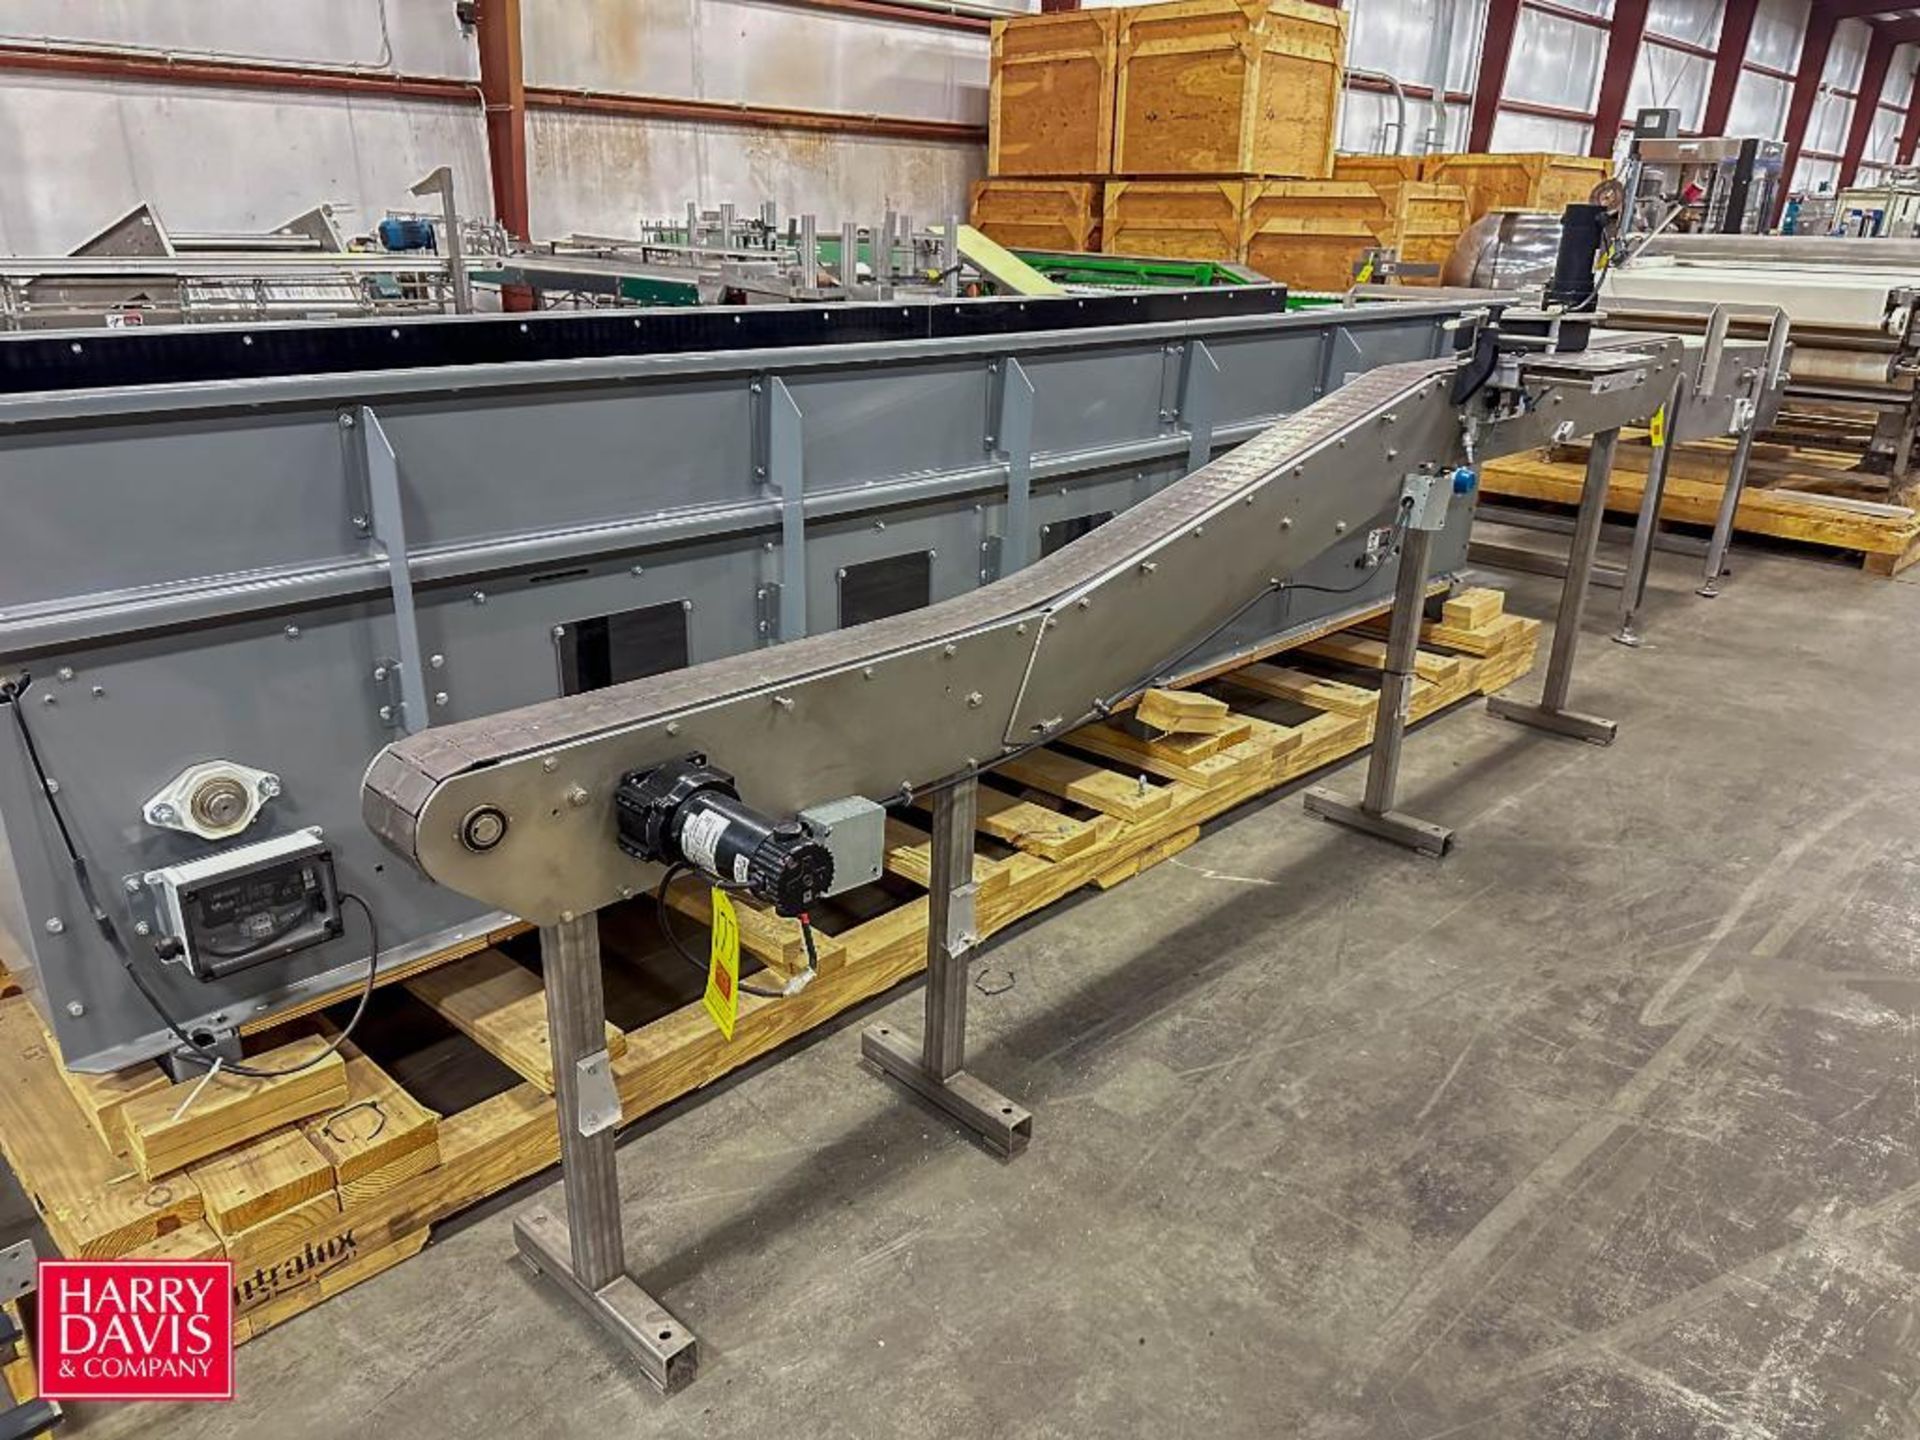 Product Conveyor: 144" Length x 5.5" Width with Plastic Table Top Chain and Drive